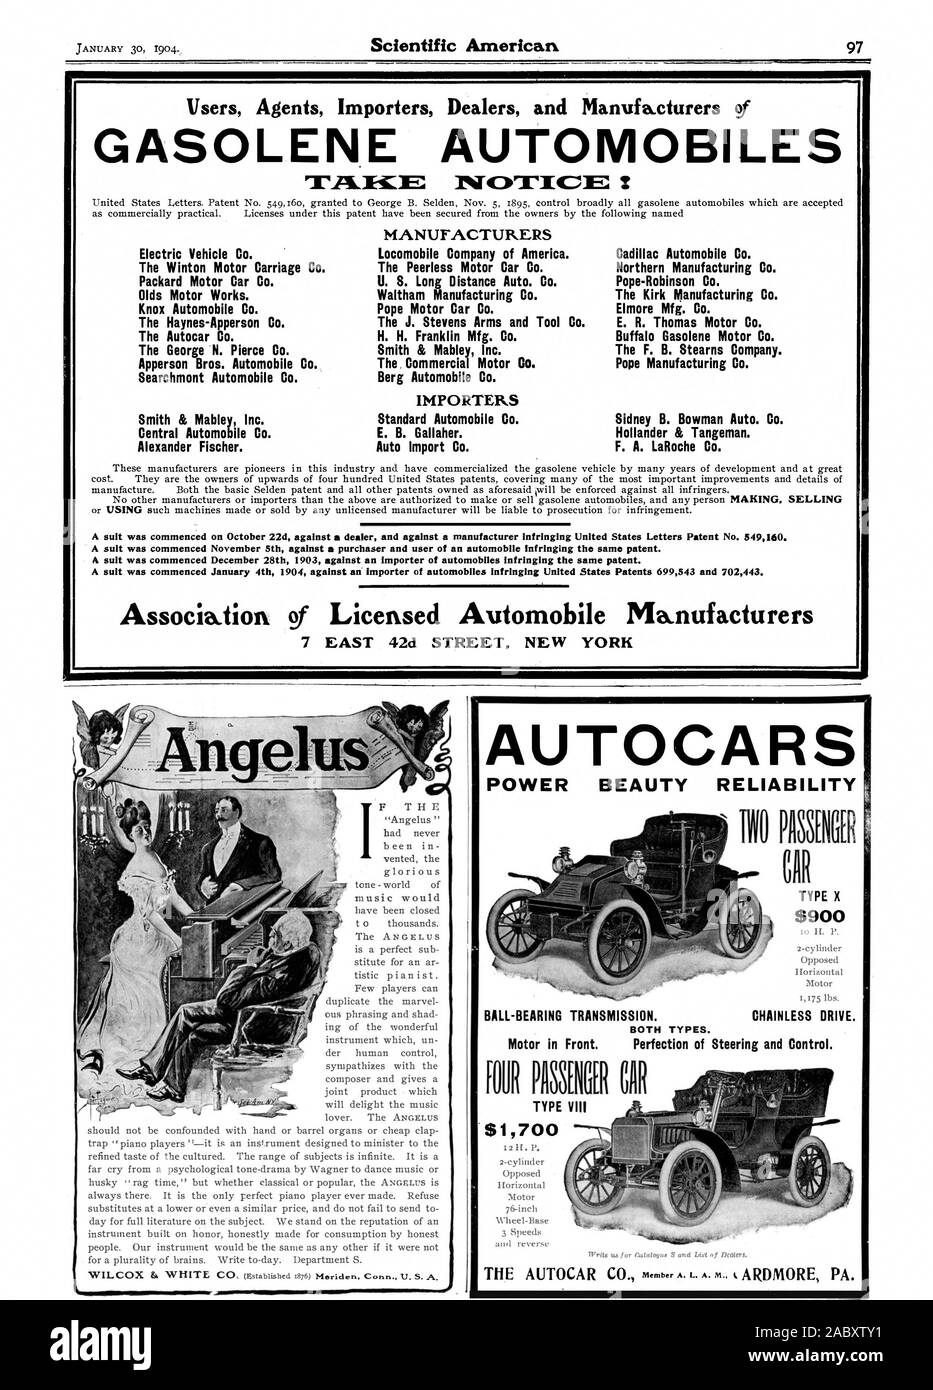 GASOLENE AUTOMOBILES Electric Vehicle Co. The Winton Motor Carriage Co. Packard Motor Car Co. Olds Motor Works. Knox Automobile Co. The Haynes-Apperson Co. The Autocar Co. The George N. Pierce Co. Apperson Bros. Automobile Co. Searchmont Automobile Co. Smith & Mabley Inc. Central Automobile Co. Alexander Fischer. MANUFACTURERS Locomobile Company of America. The Peerless Motor Car Co. U. S. Long Distance Auto. Co. Waltham Manufacturing Co. Pope Motor Car Co. The J. Stevens Arms and Tool H. H. Franklin Mfg. Co. Smith & Mabley Inc. The Commercial Motor Co. Berg Automobile Co. IMPORTERS Standard Stock Photo